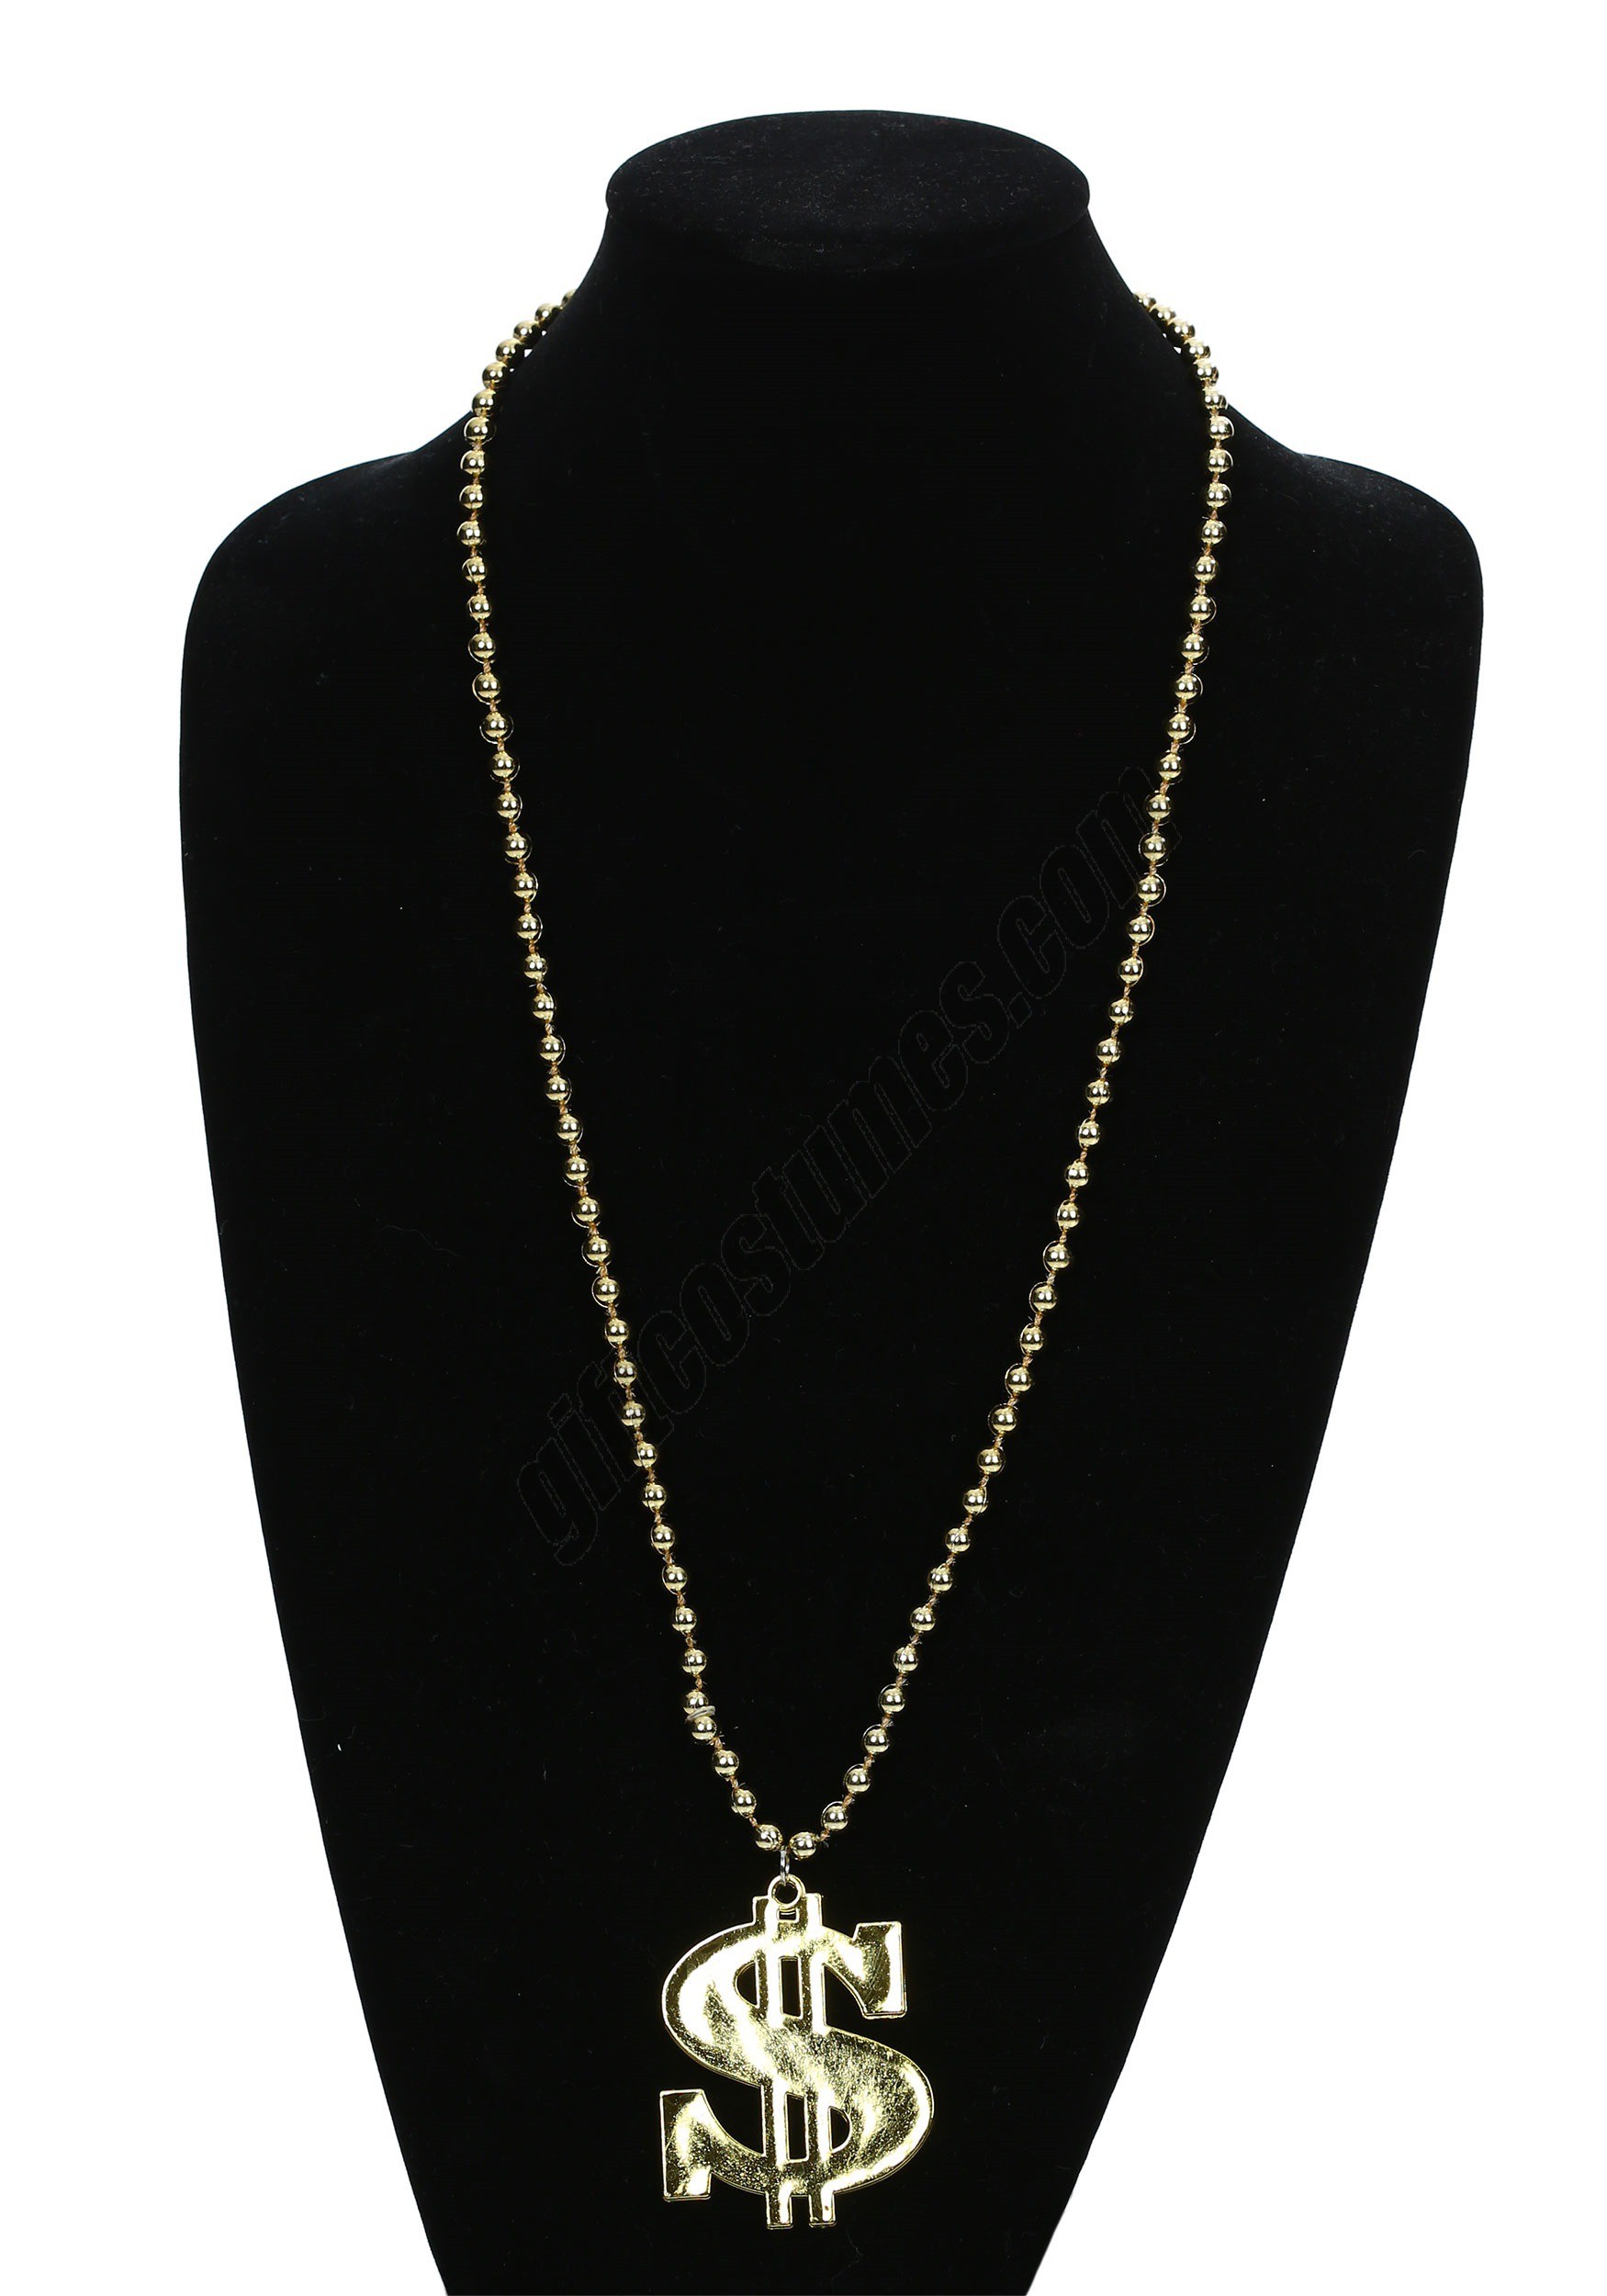 Deluxe Dollar Sign Necklace Promotions - Deluxe Dollar Sign Necklace Promotions